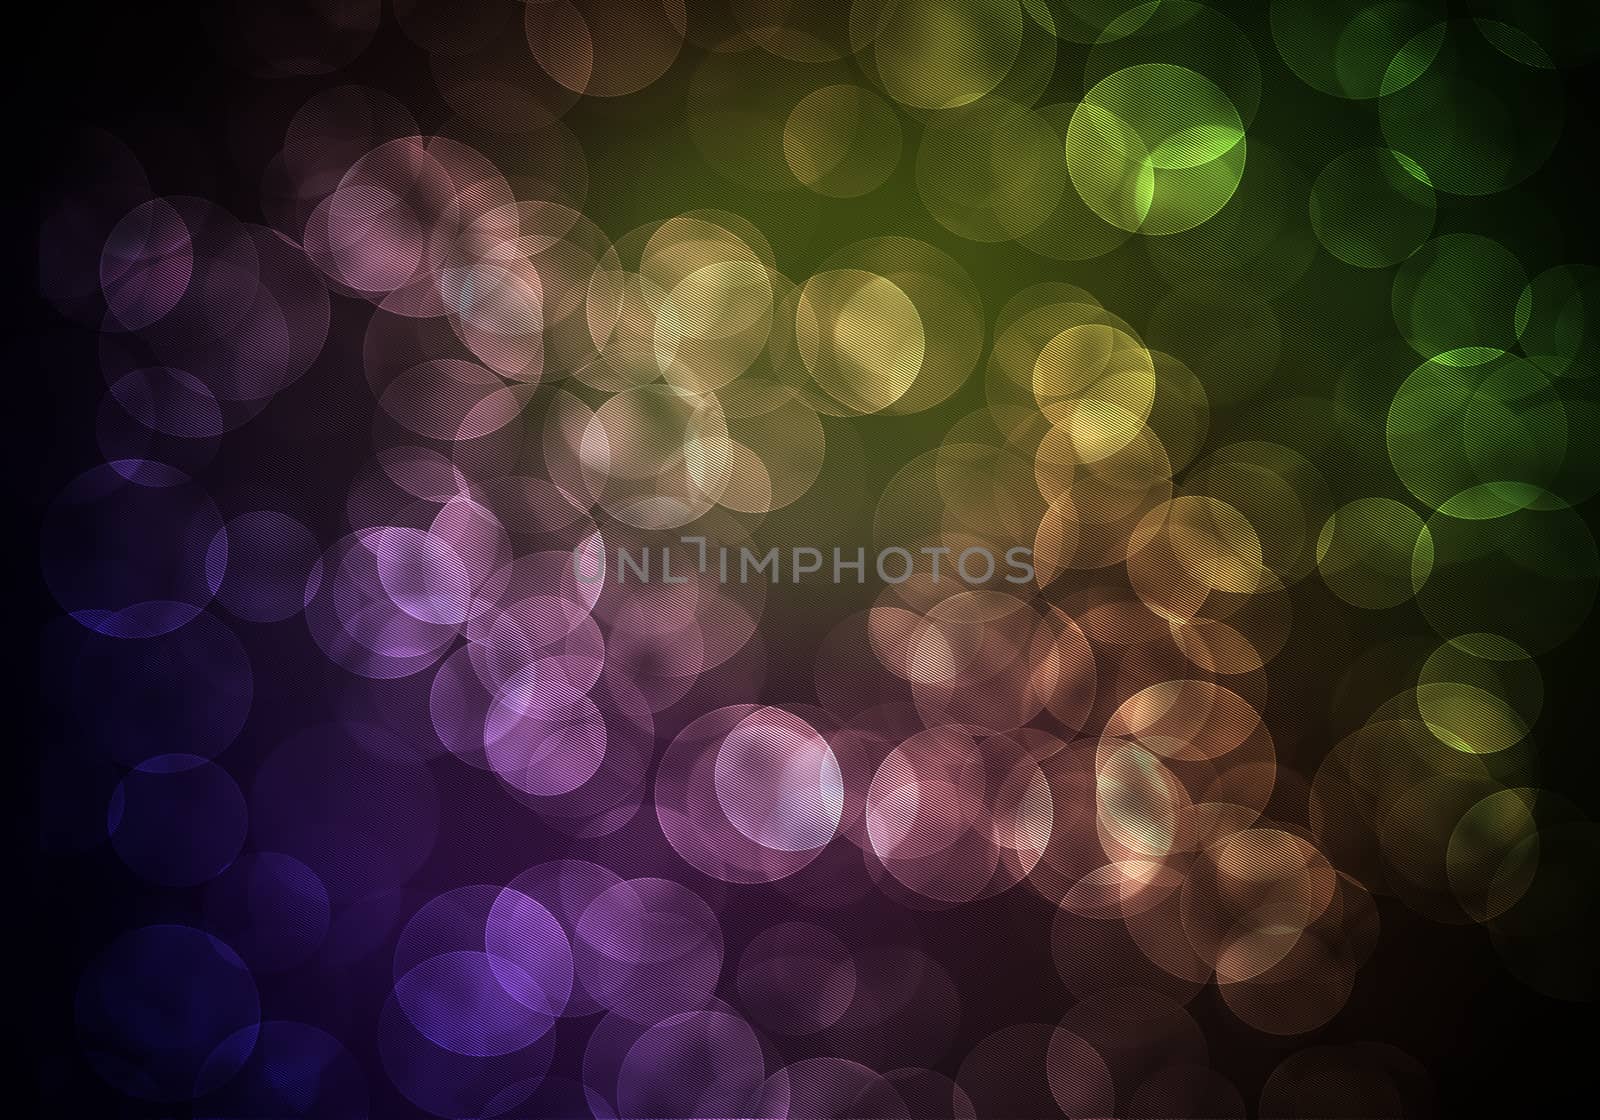 Abstract colorful background with light spots and rounds